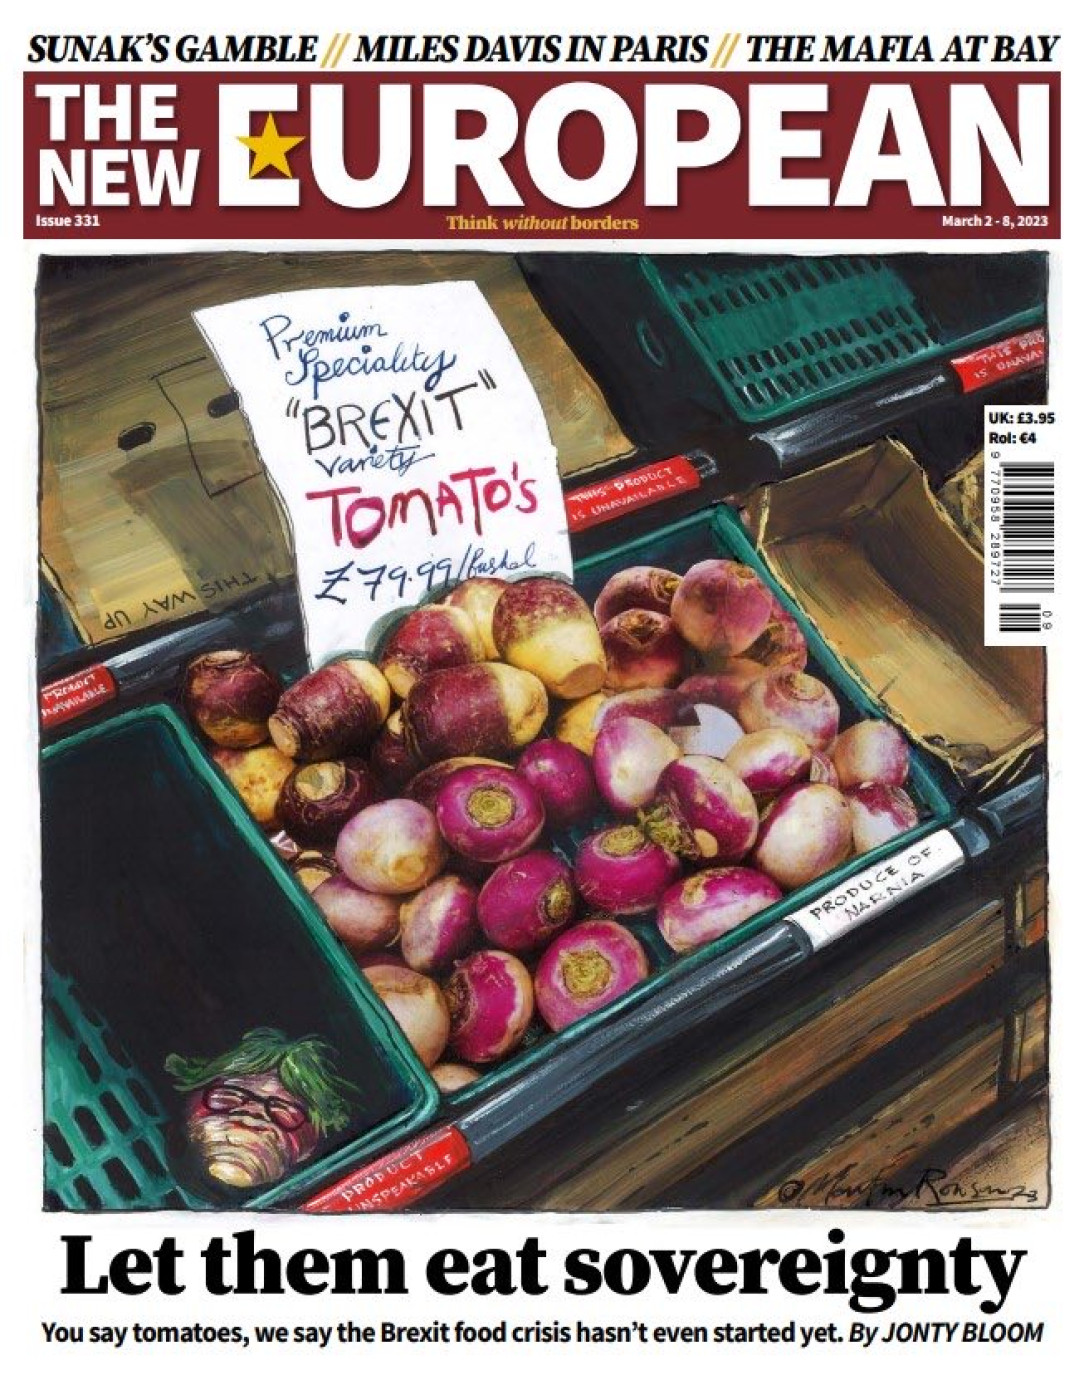 Brexit tomatoes for £79, 99. &quot;Let them eat sovereignty&quot; - Cover of The New European [march 2, 2023]